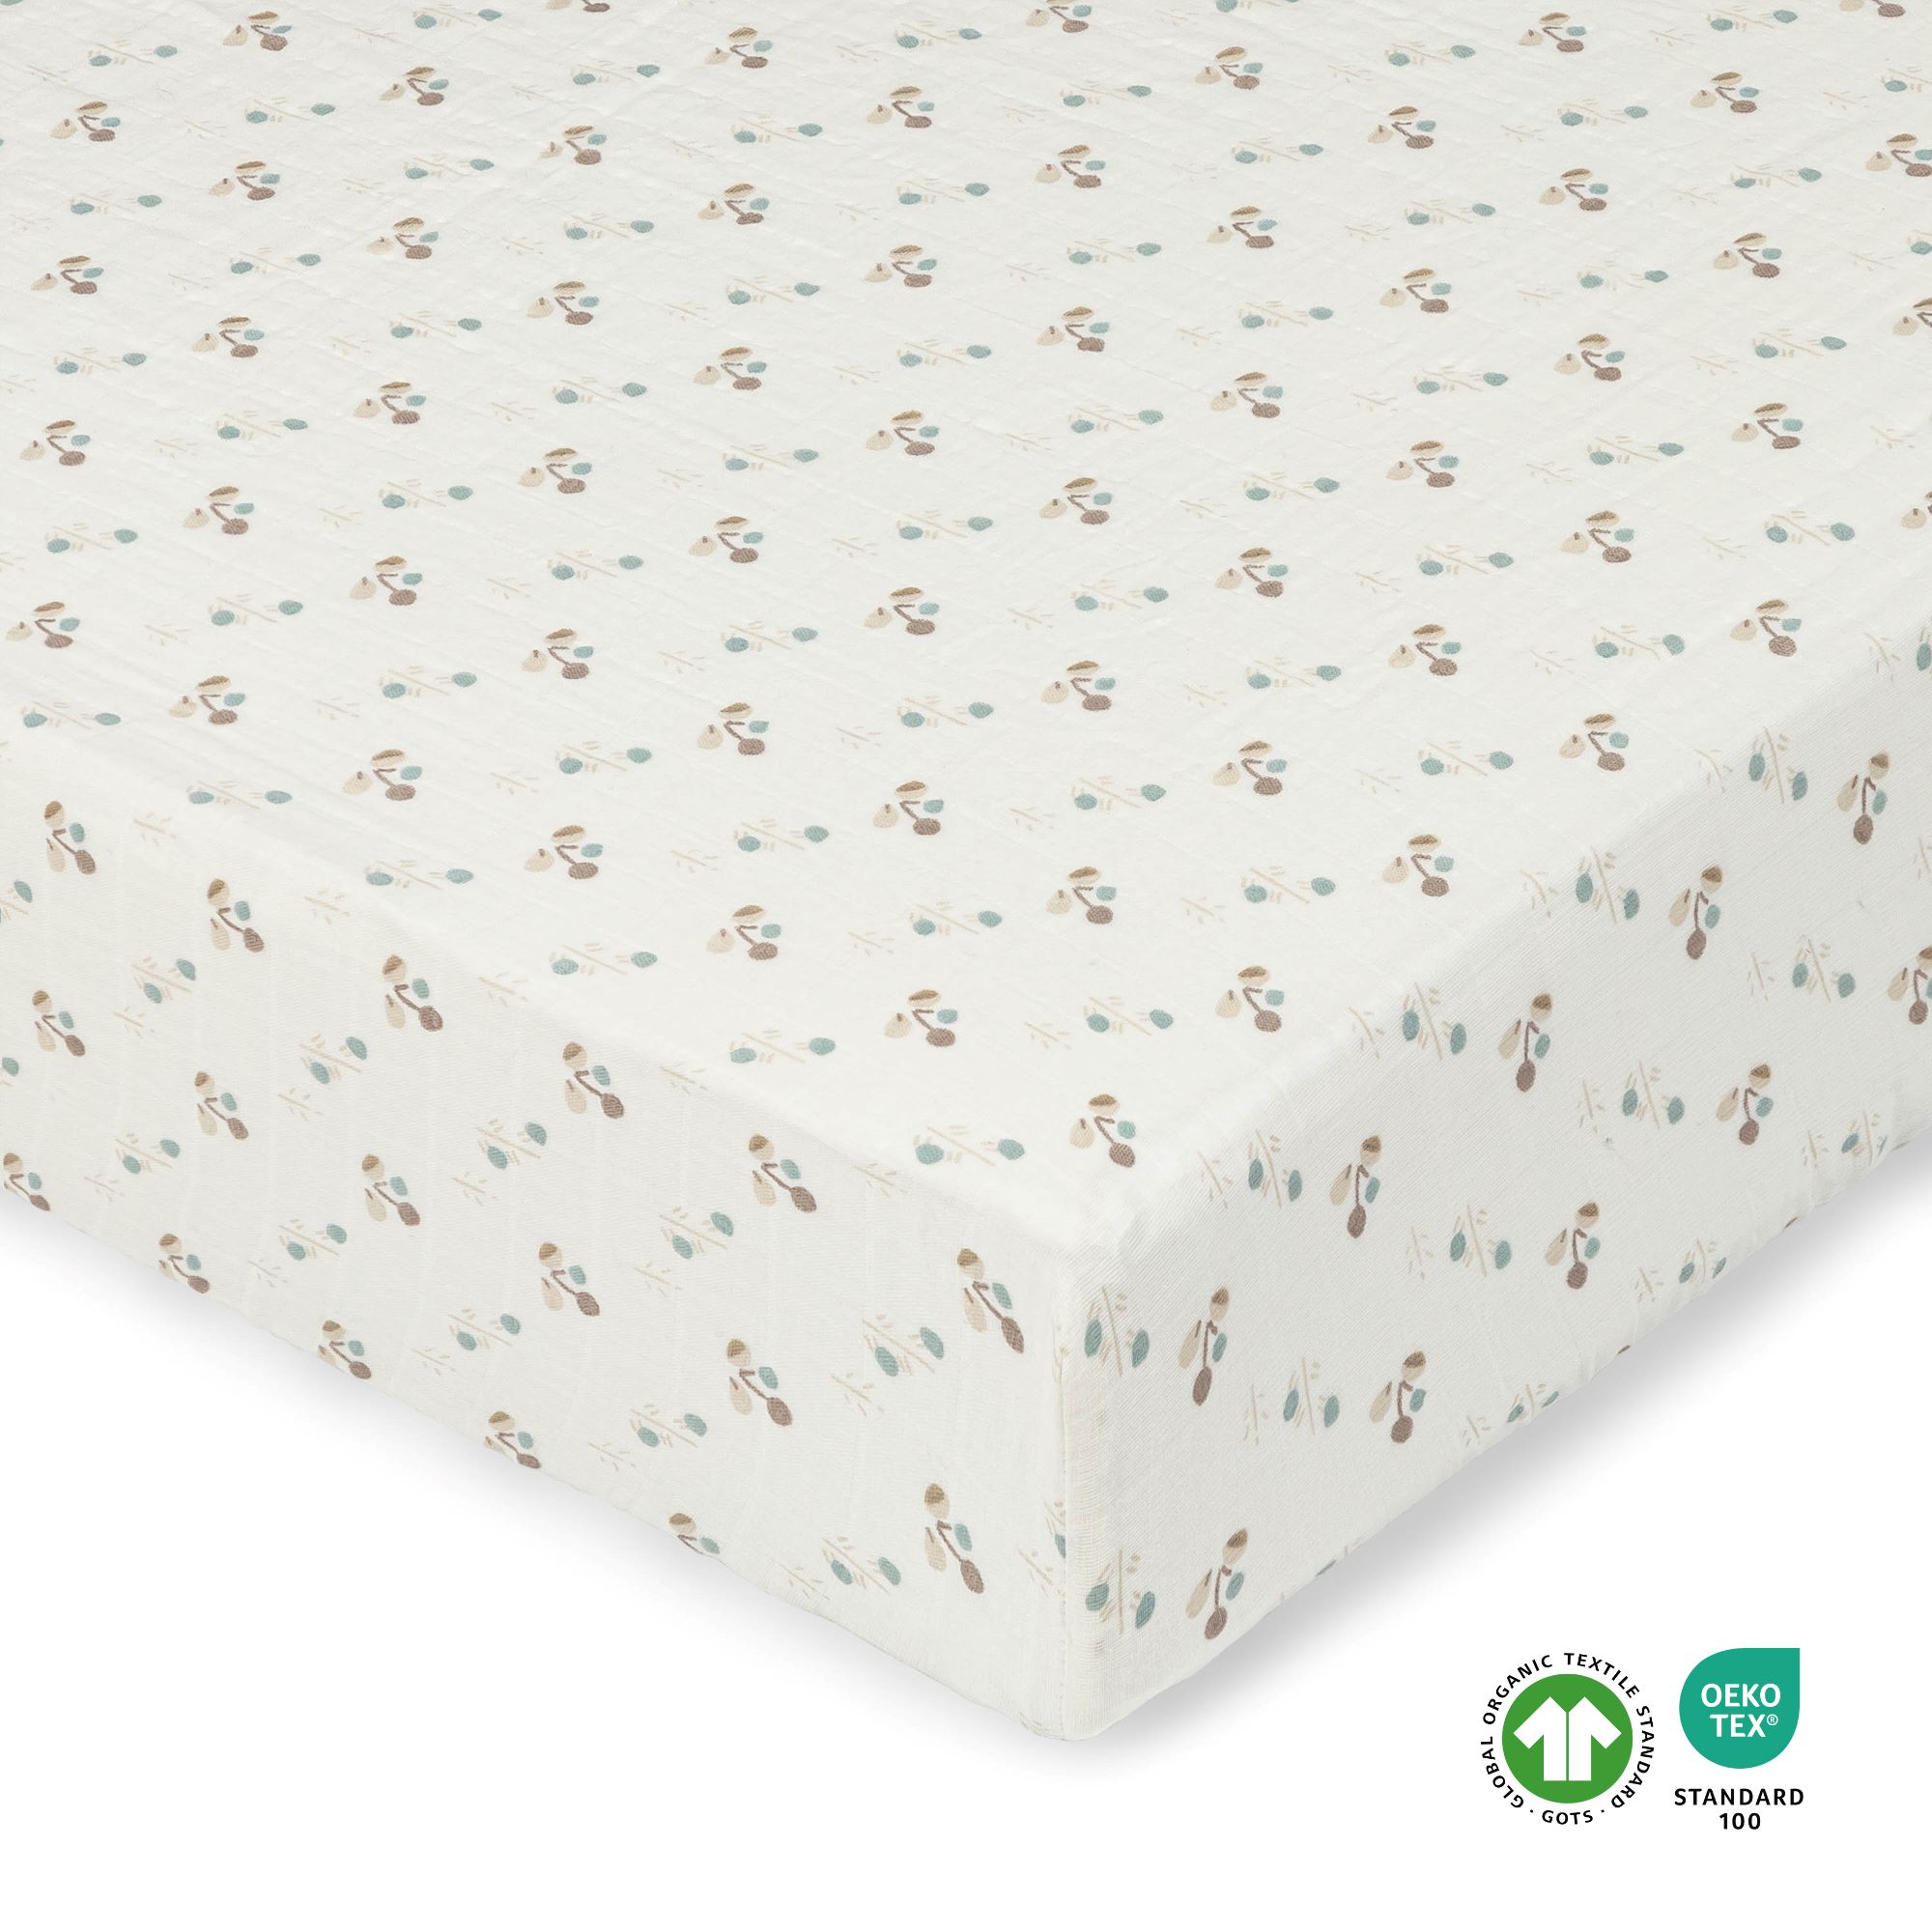 A cream colored crib sheet with poppy designs